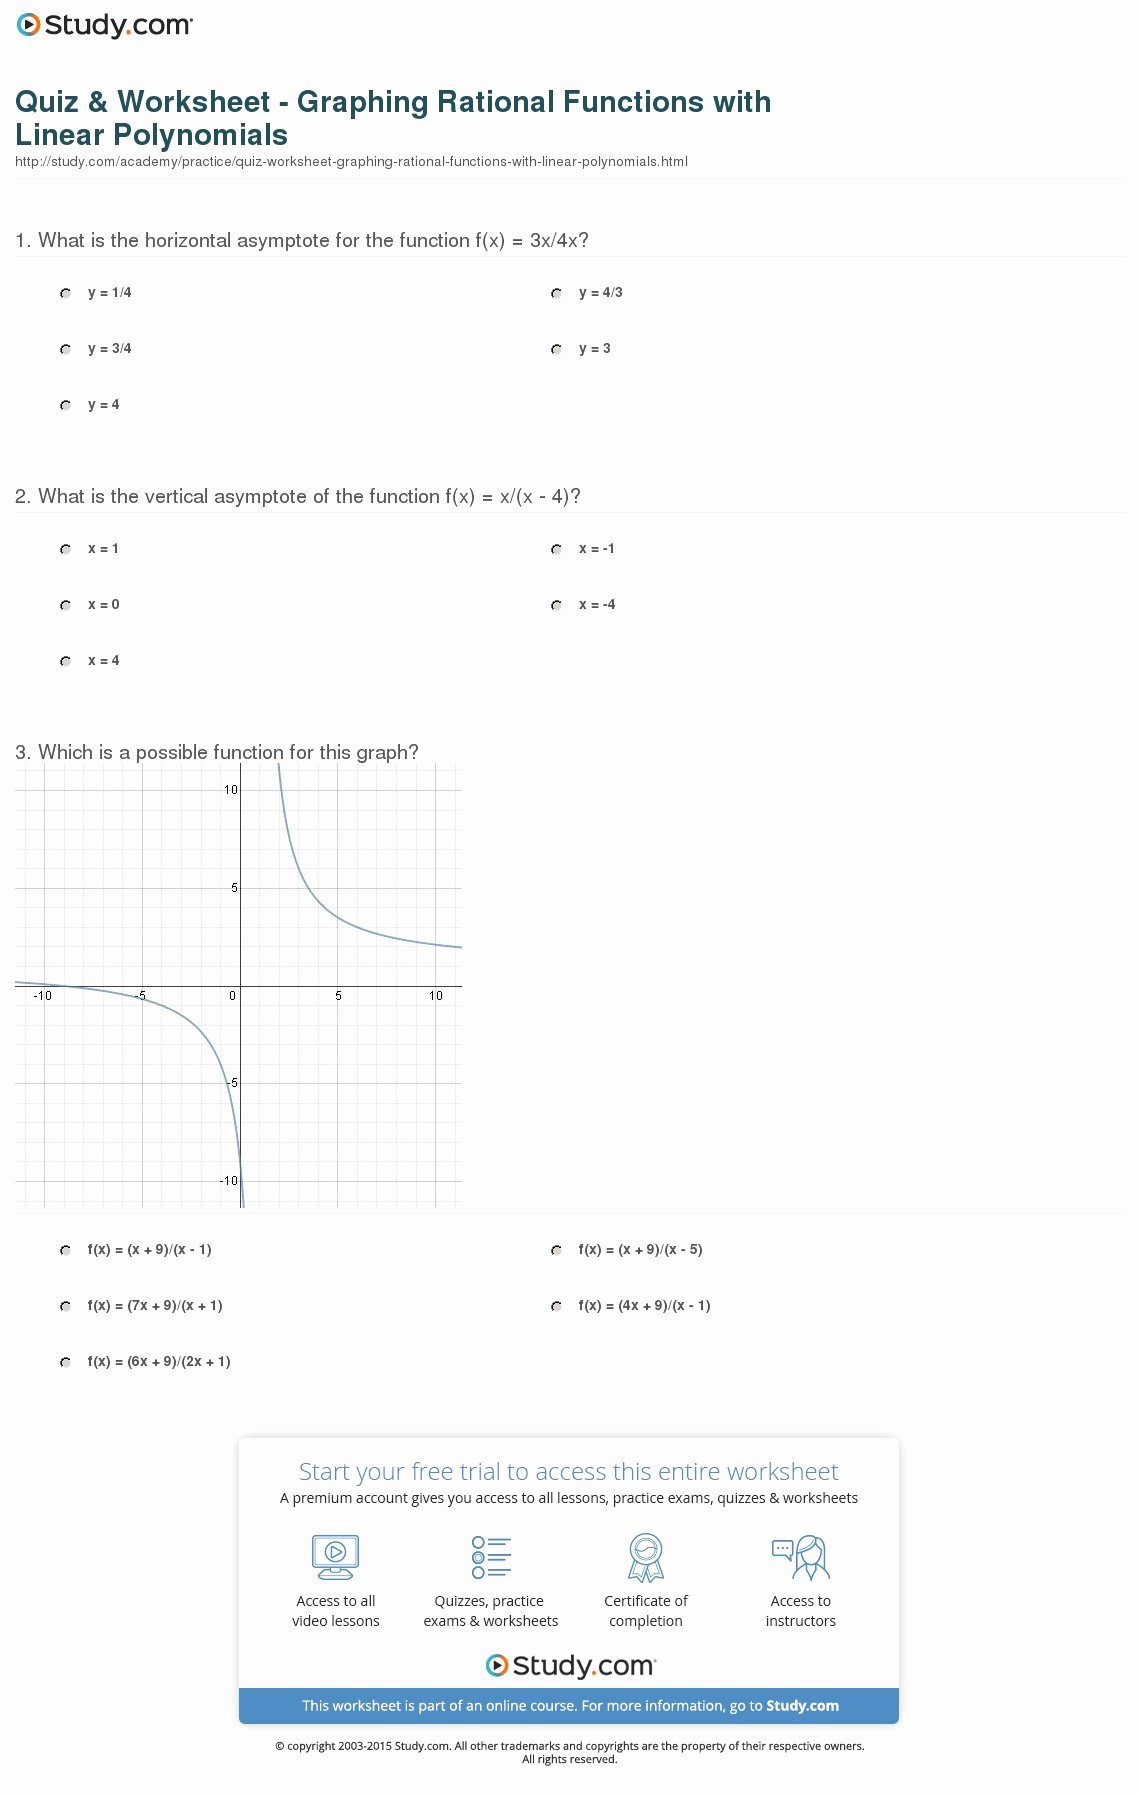 Graphing Polynomial Functions Worksheet Answers Lovely Quiz &amp; Worksheet Graphing Rational Functions with Linear